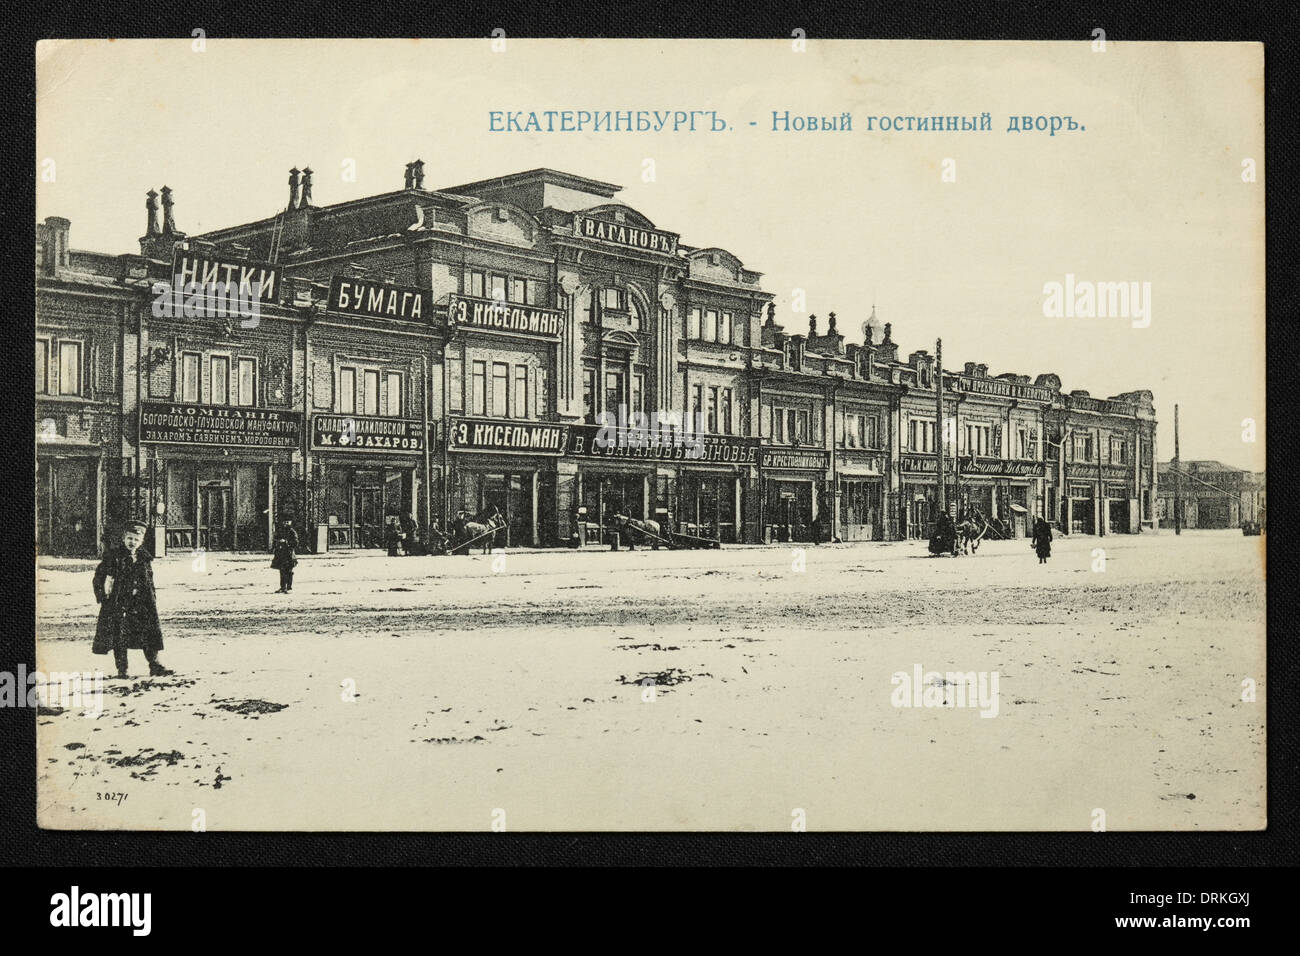 New Merchant Court (Gostiny Dvor) in Yekaterinburg, Russian Empire. Black and white vintage photograph by Russian photographer Nikolai Vvedensky dated from the beginning of the 20th century issued in the Russian vintage postcard published by M.S. Semkov, Yekaterinburg. Text in Russian: Yekaterinburg. New Merchant Court. The Gostiny Dvor is a historic Russian term for an indoor market, or shopping centre. It is translated from Russian either as 'Guest Court' or 'Merchant Yard'. Courtesy of the Azoor Postcard Collection. Stock Photo